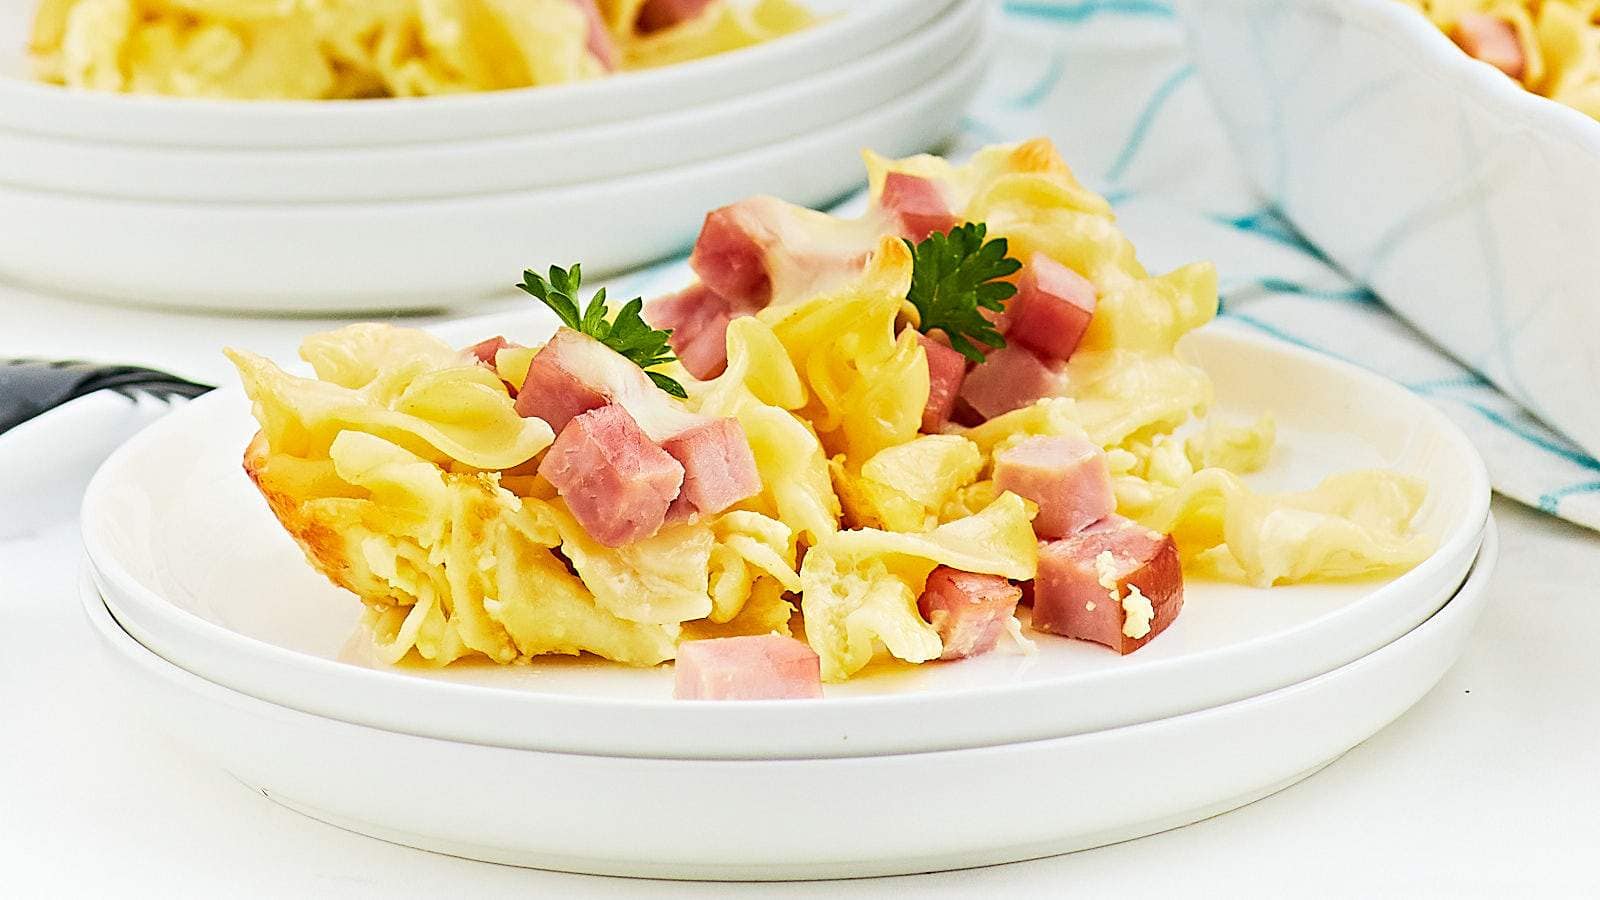 Ham And Noodle Casserole recipe by Cheerful Cook.